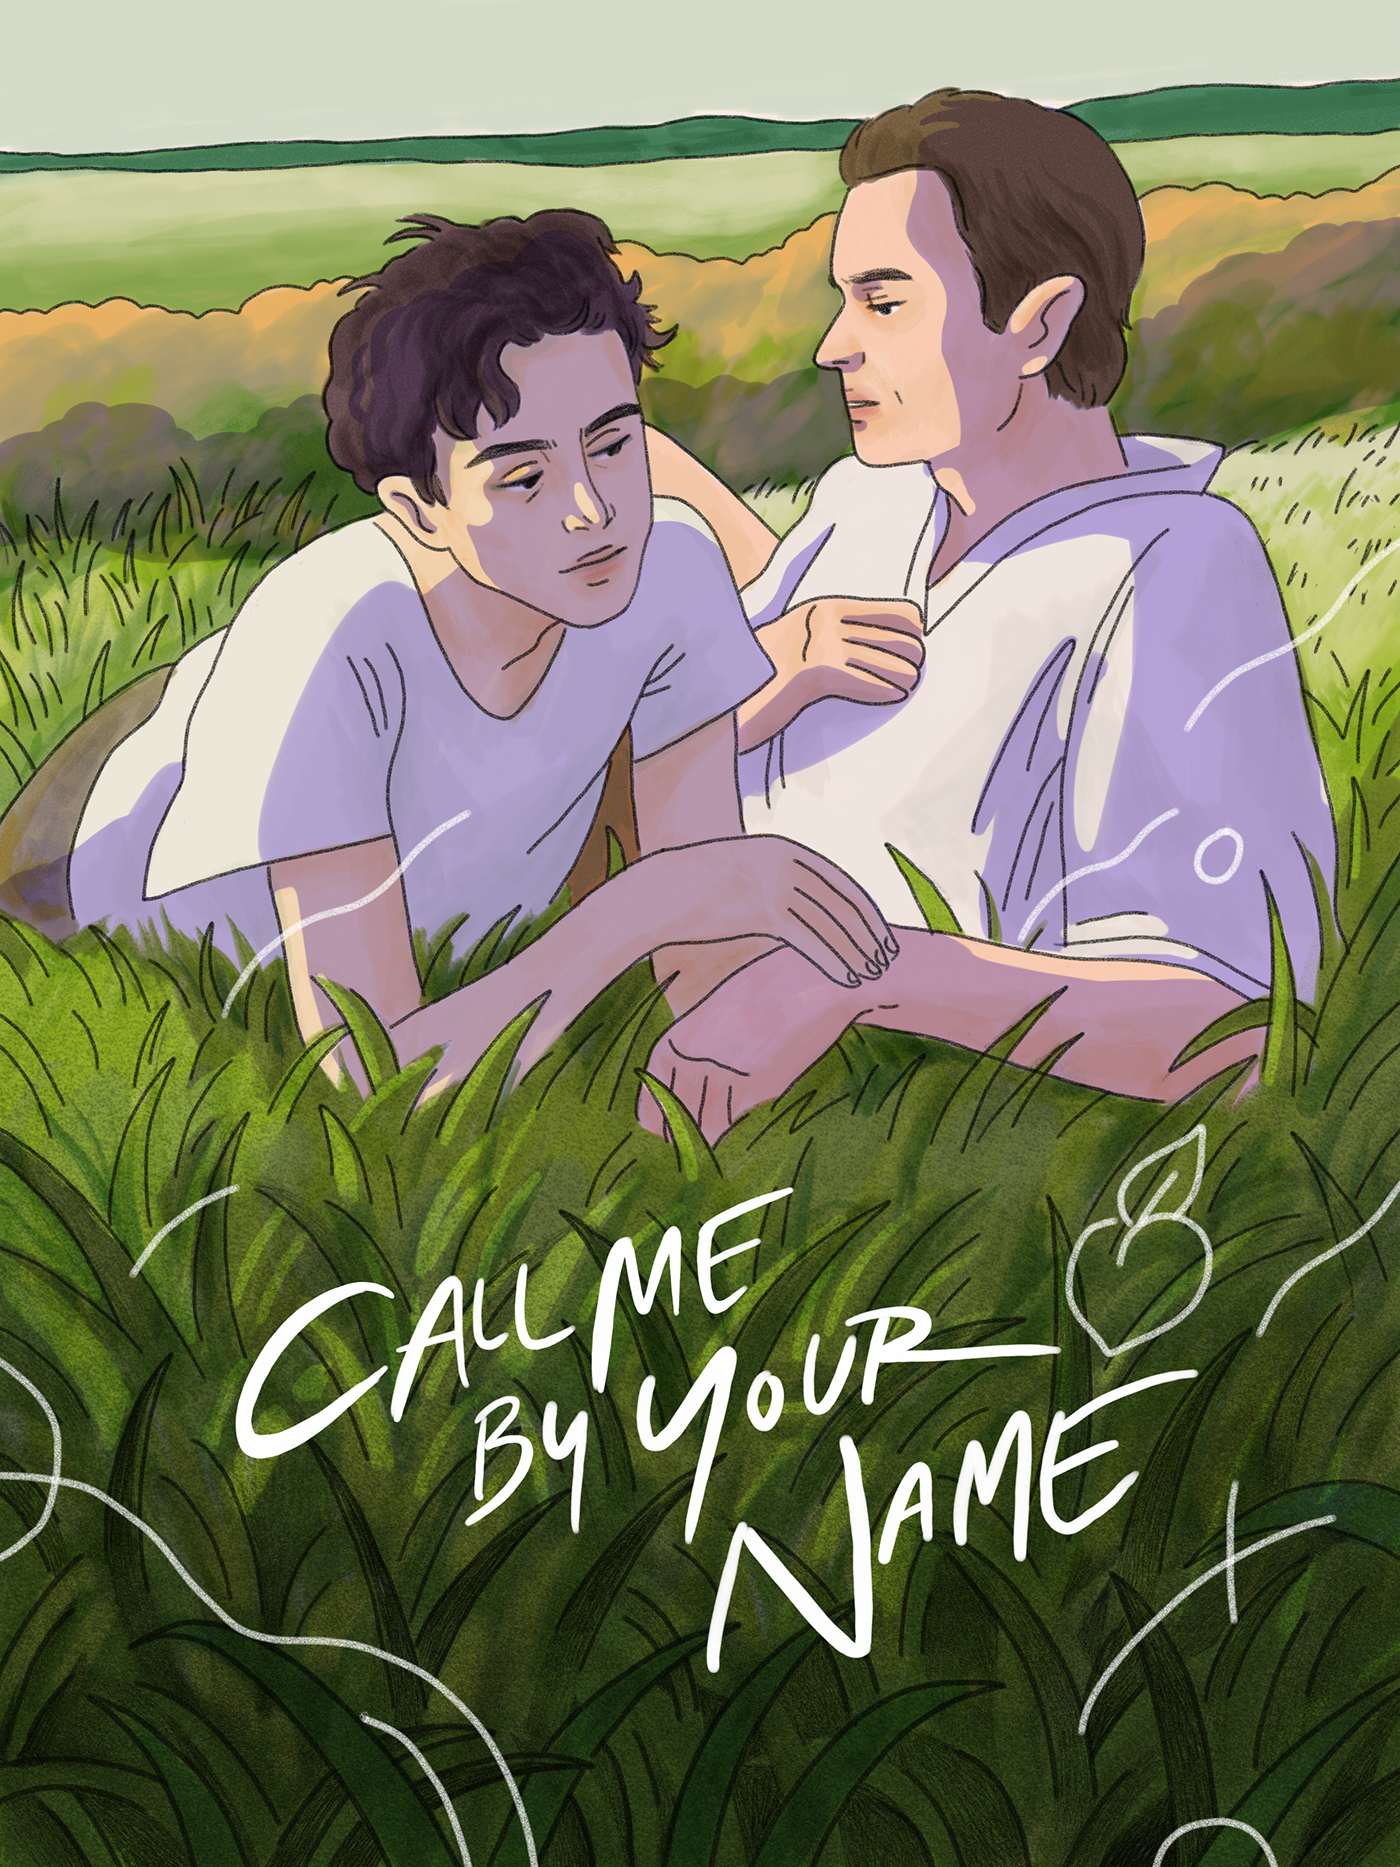 Call me by your name. 